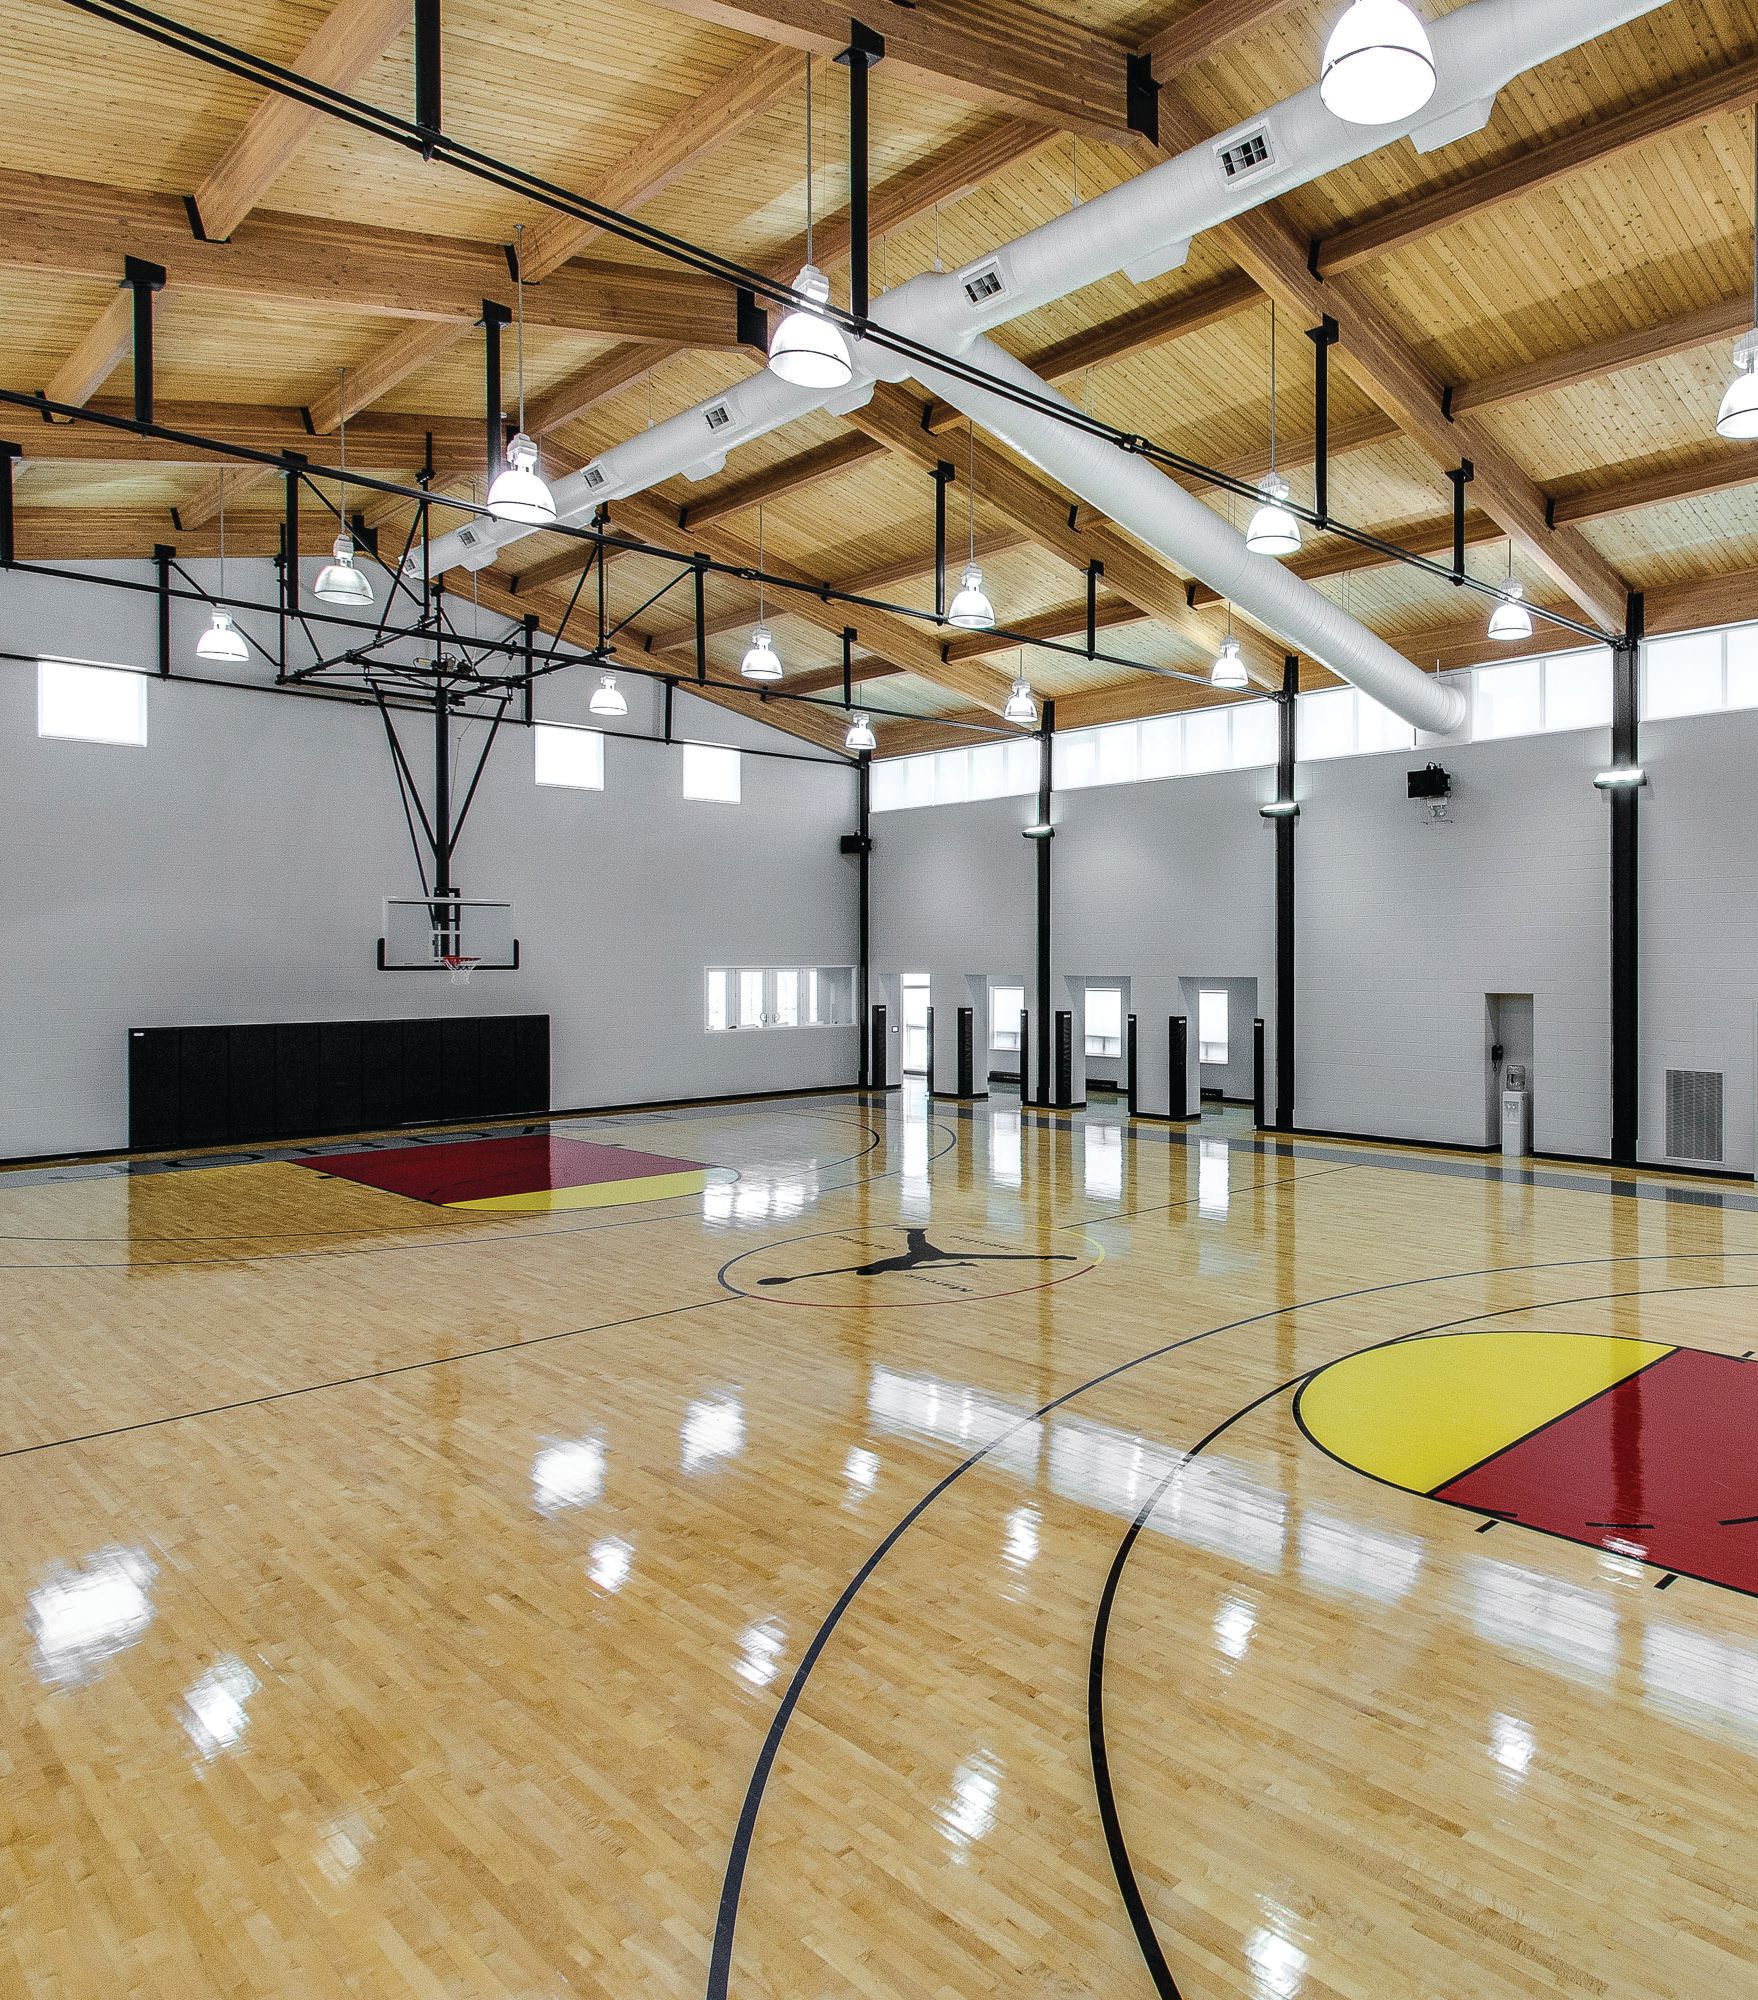 The signature Jumpman logo adds an exclusive Michael Jordan touch to the in-home basketball court. PHOTO BY JOHN ECKHART